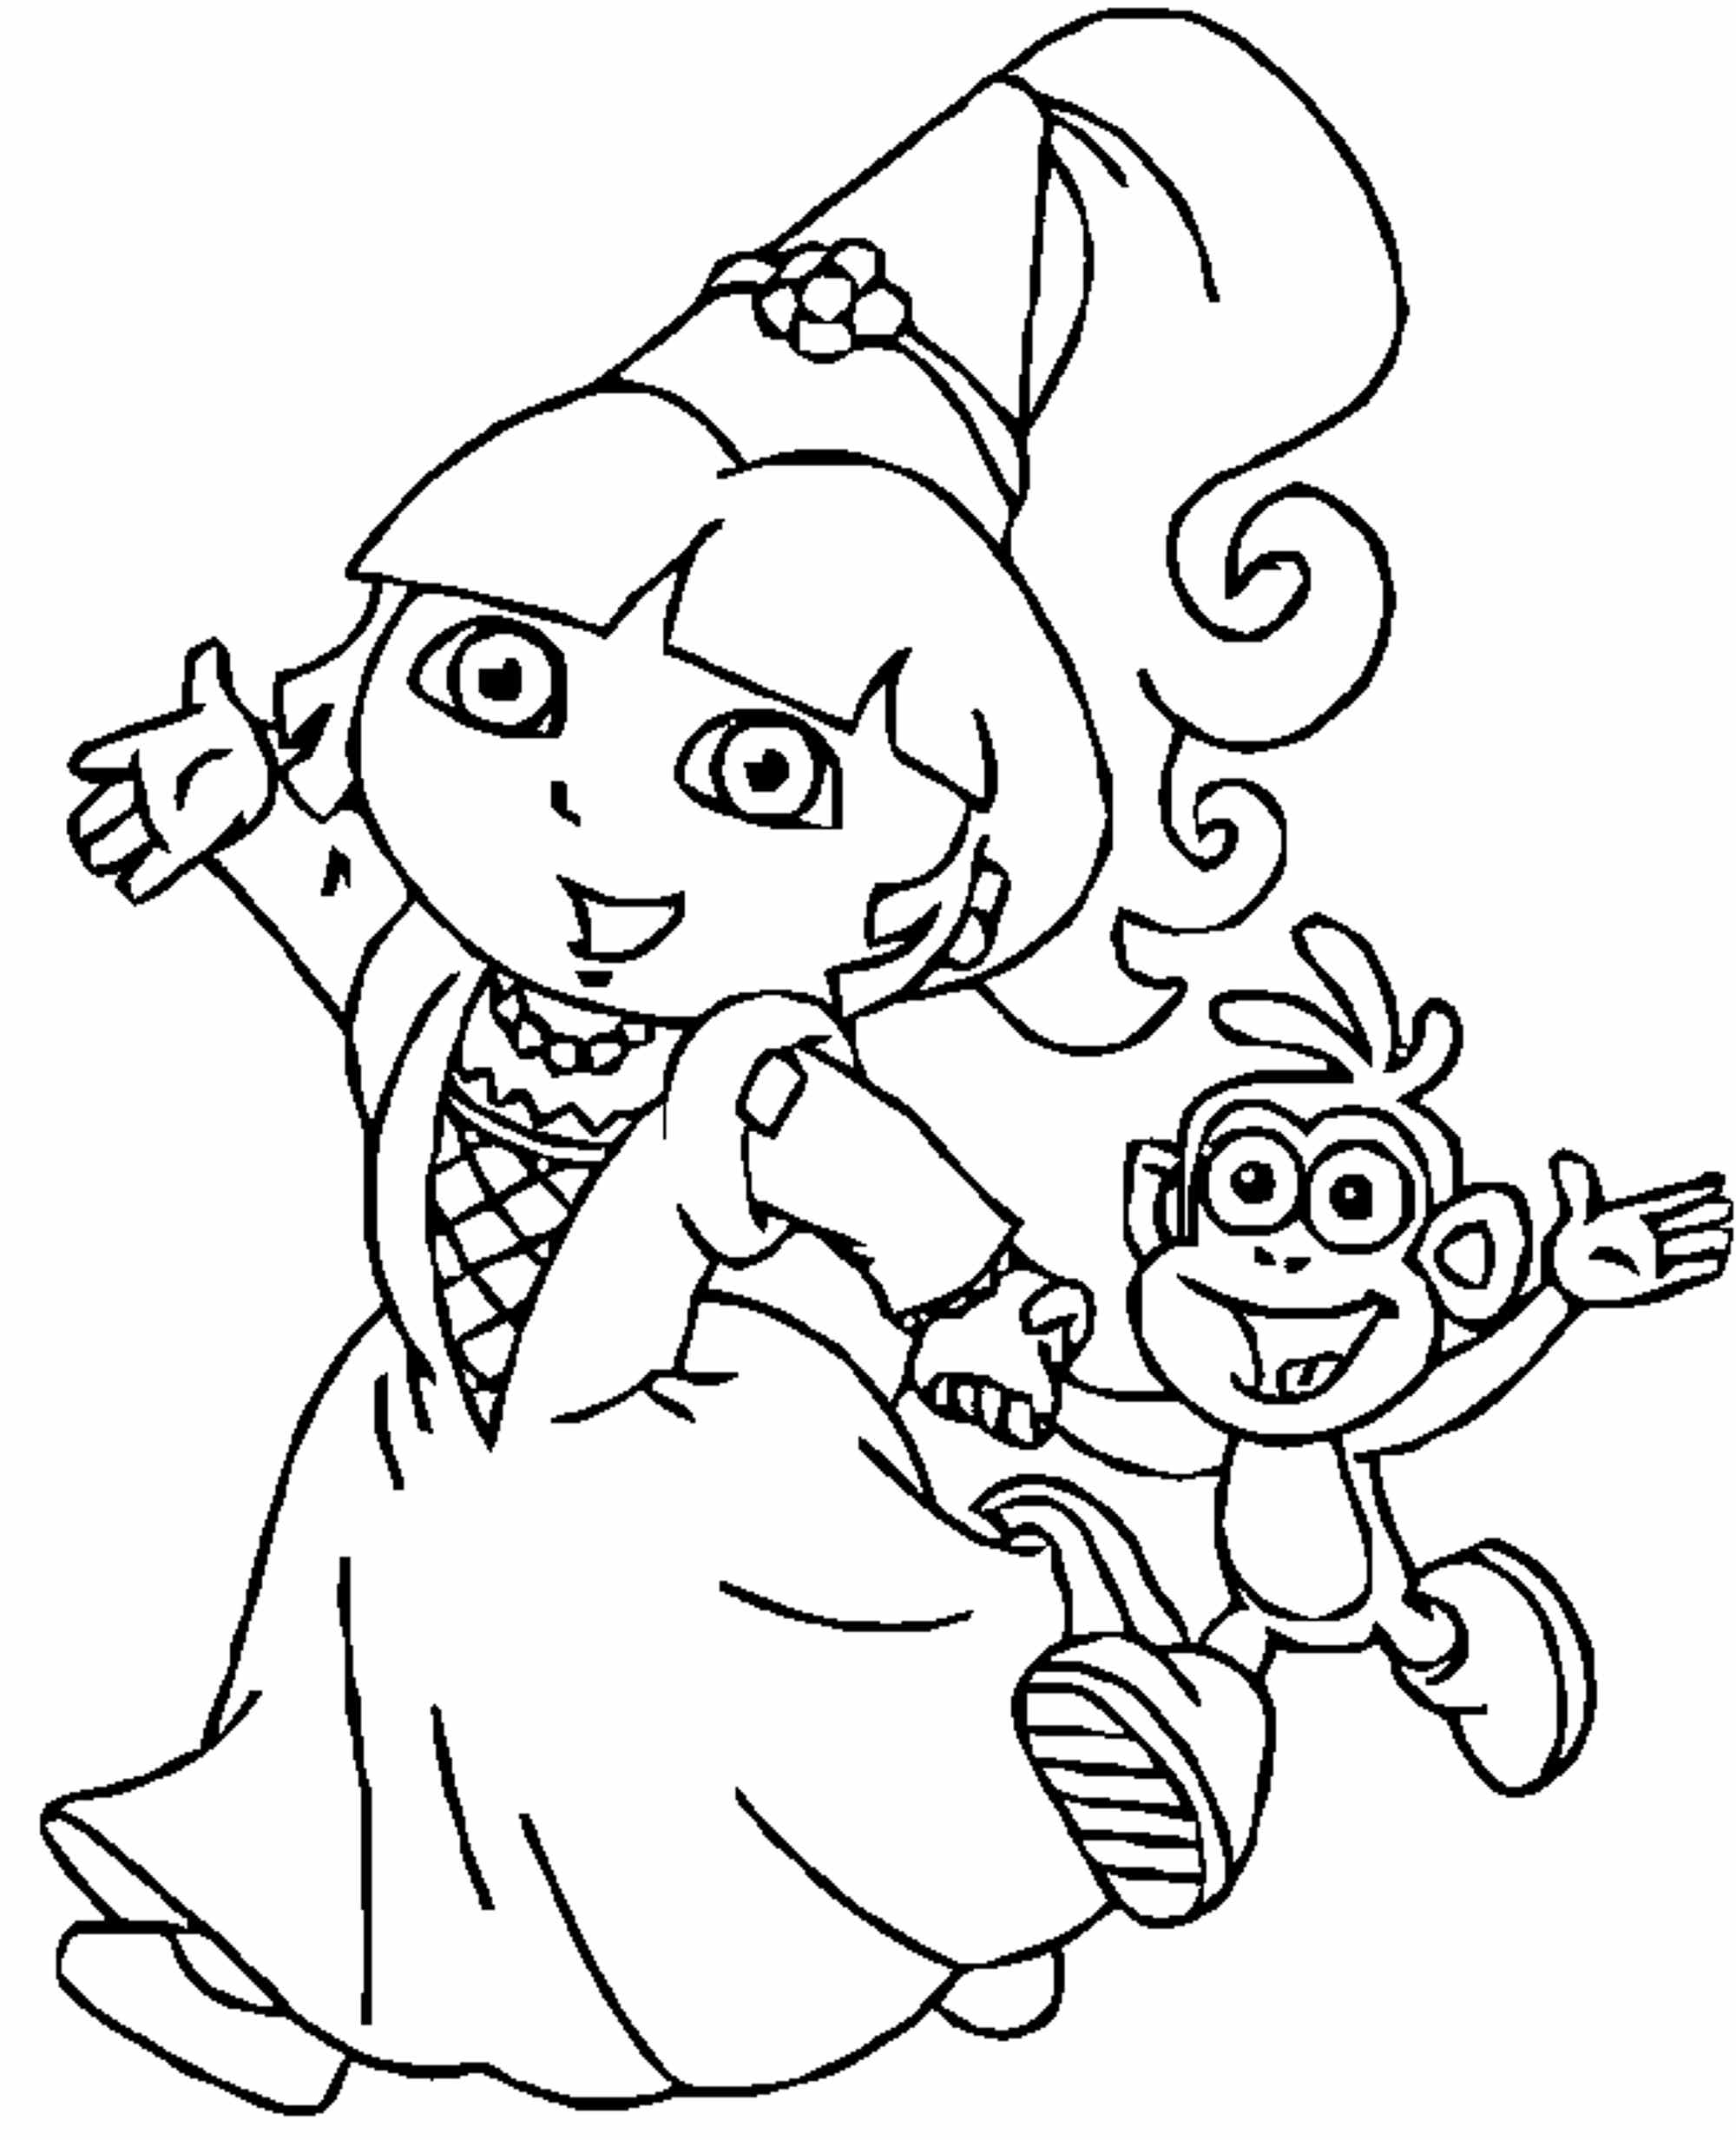 Dora Coloring Pages Printable 7